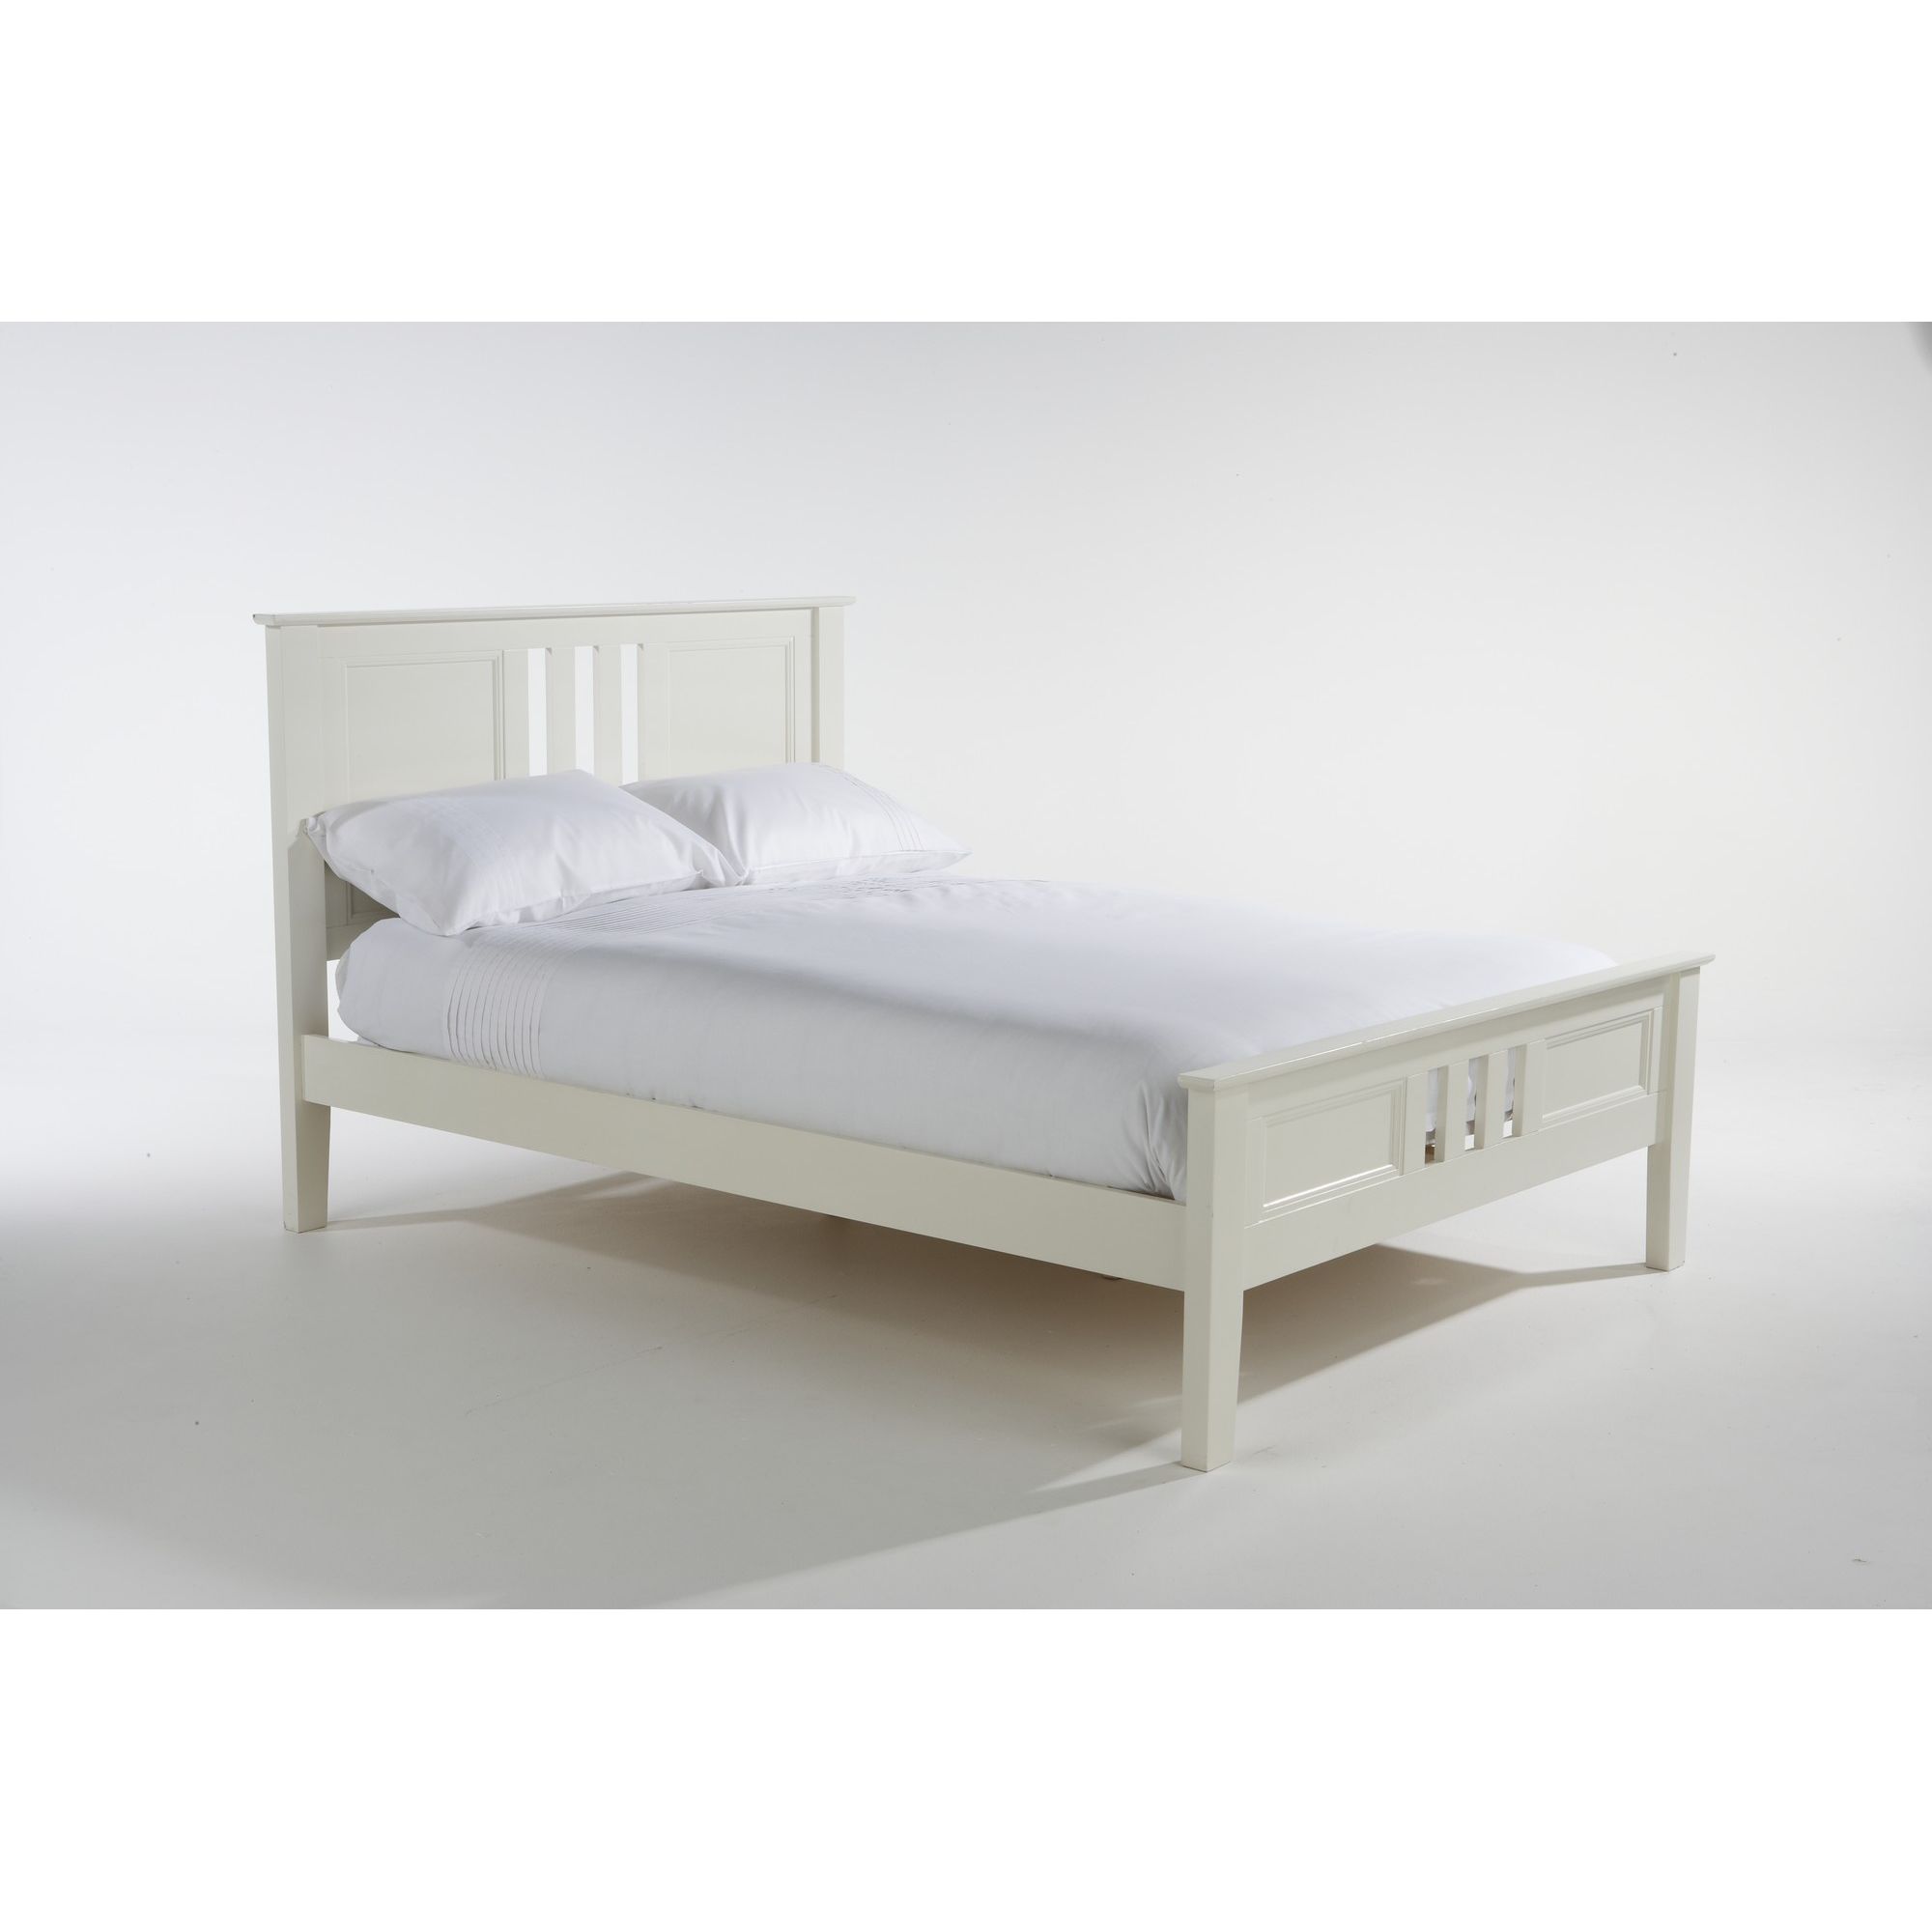 Elements Venice Bed - Double at Tesco Direct